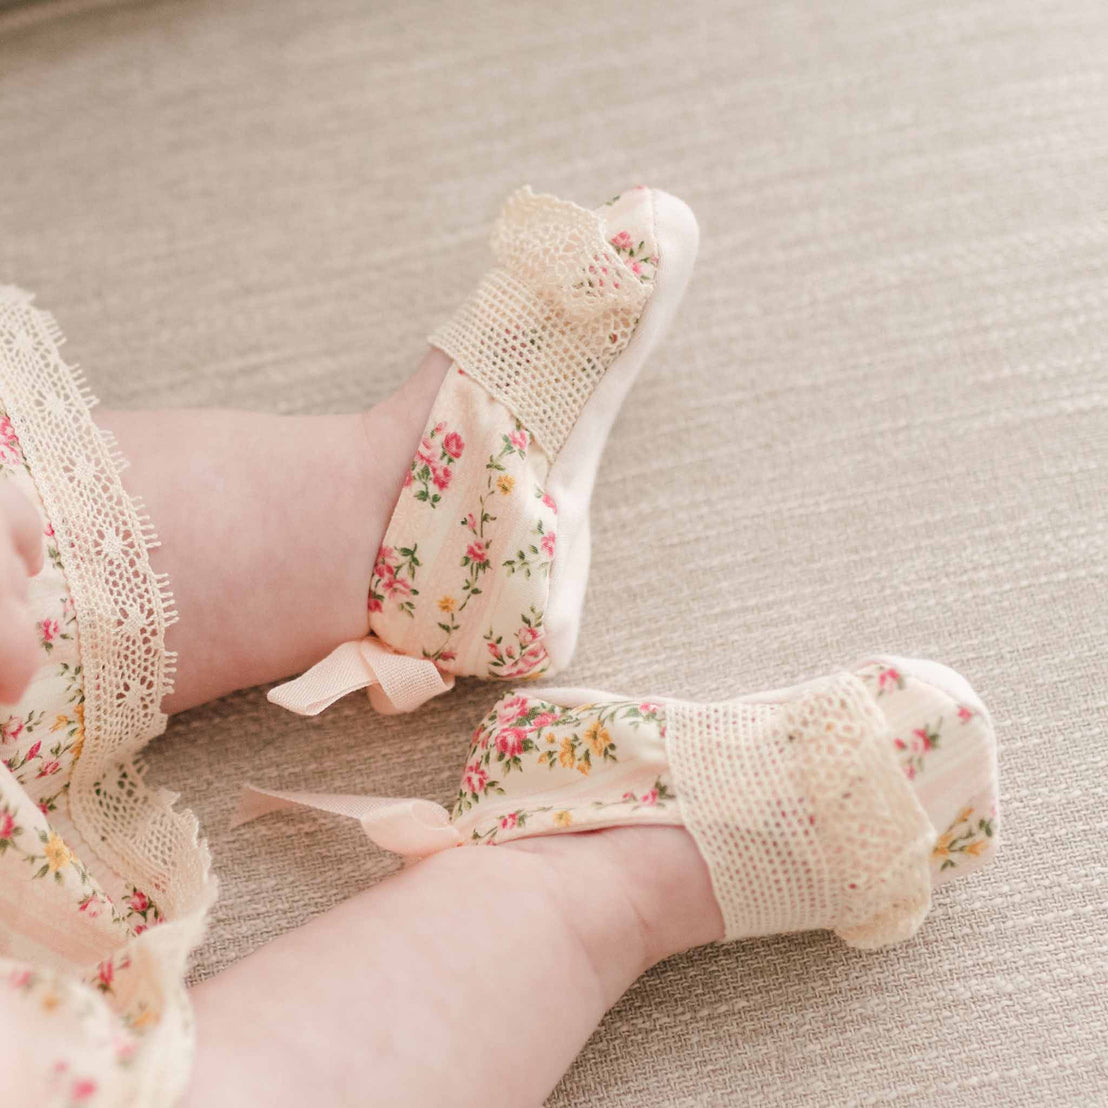 Detail of the "Blush" Eloise Booties made with the matching Eloise floral striped material with natural color lace across the toe and a coordinating cotton ribbon bow on the heel.